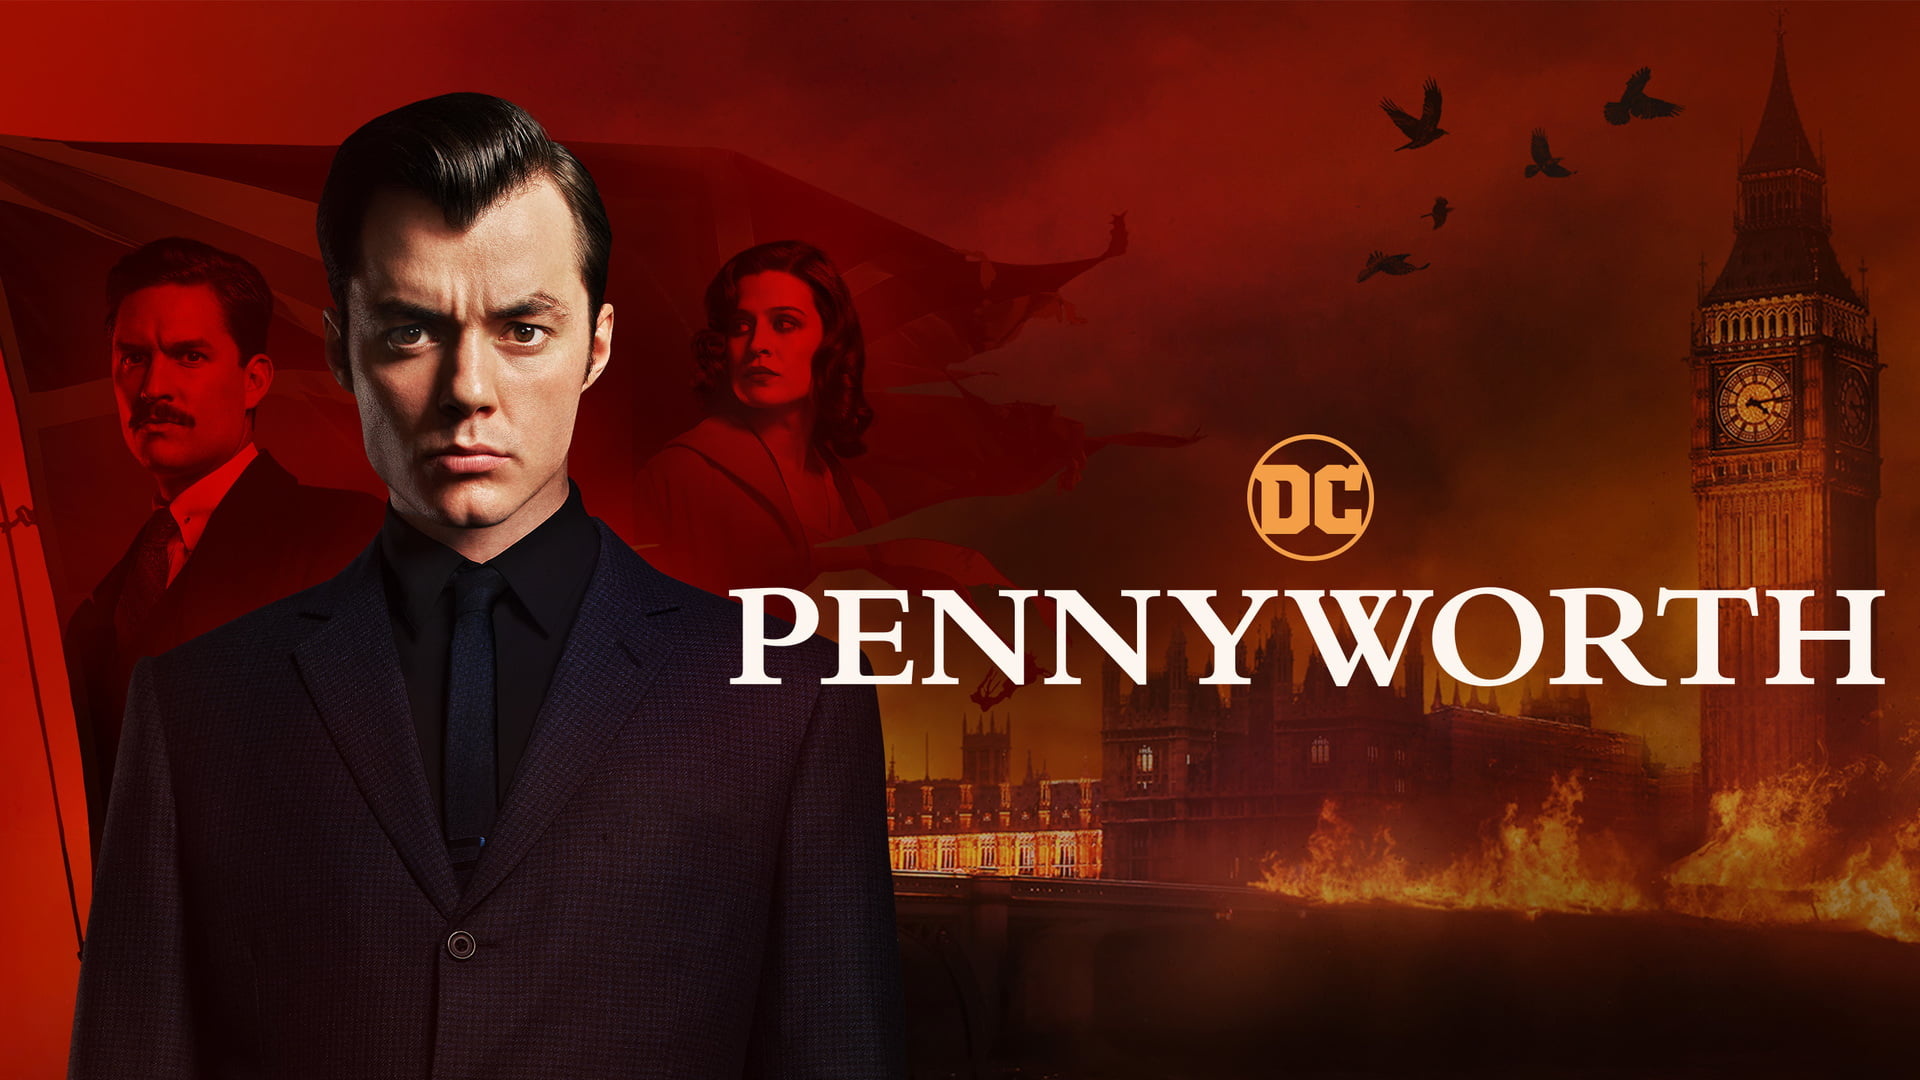 Pennyworth, TV shows, Epic drama, Intriguing characters, 1920x1080 Full HD Desktop